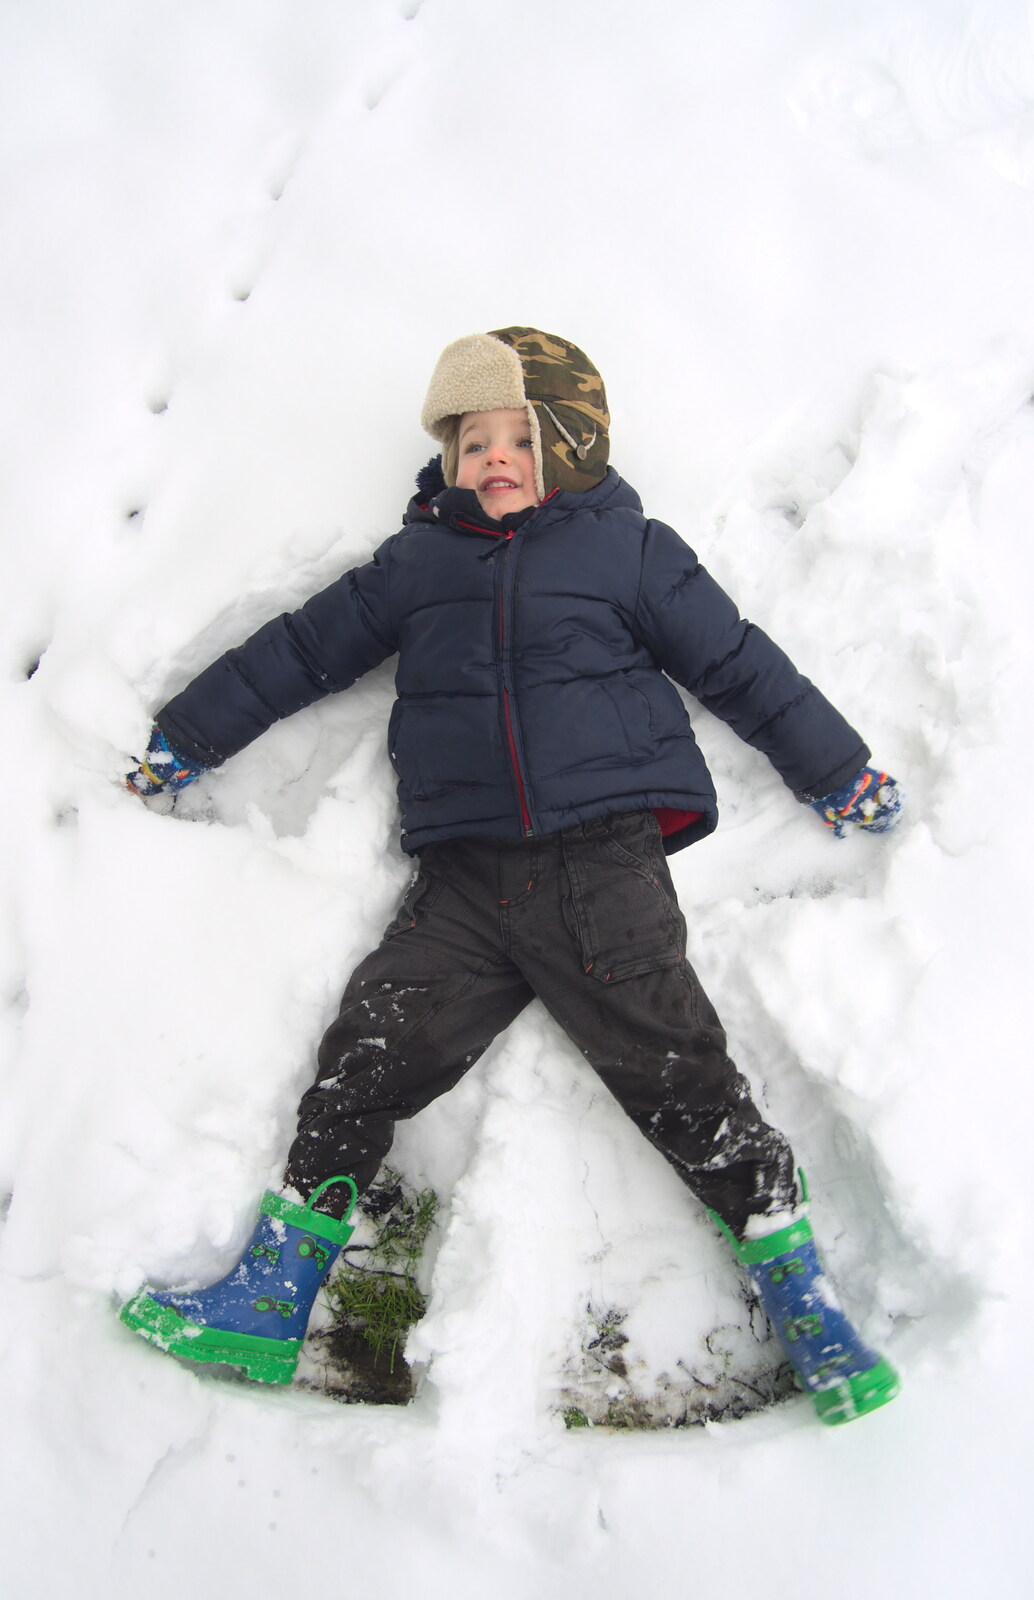 More Snow Days and a Wind Turbine is Built, Brome, Suffolk - 19th January 2013: Fred does a snow angel